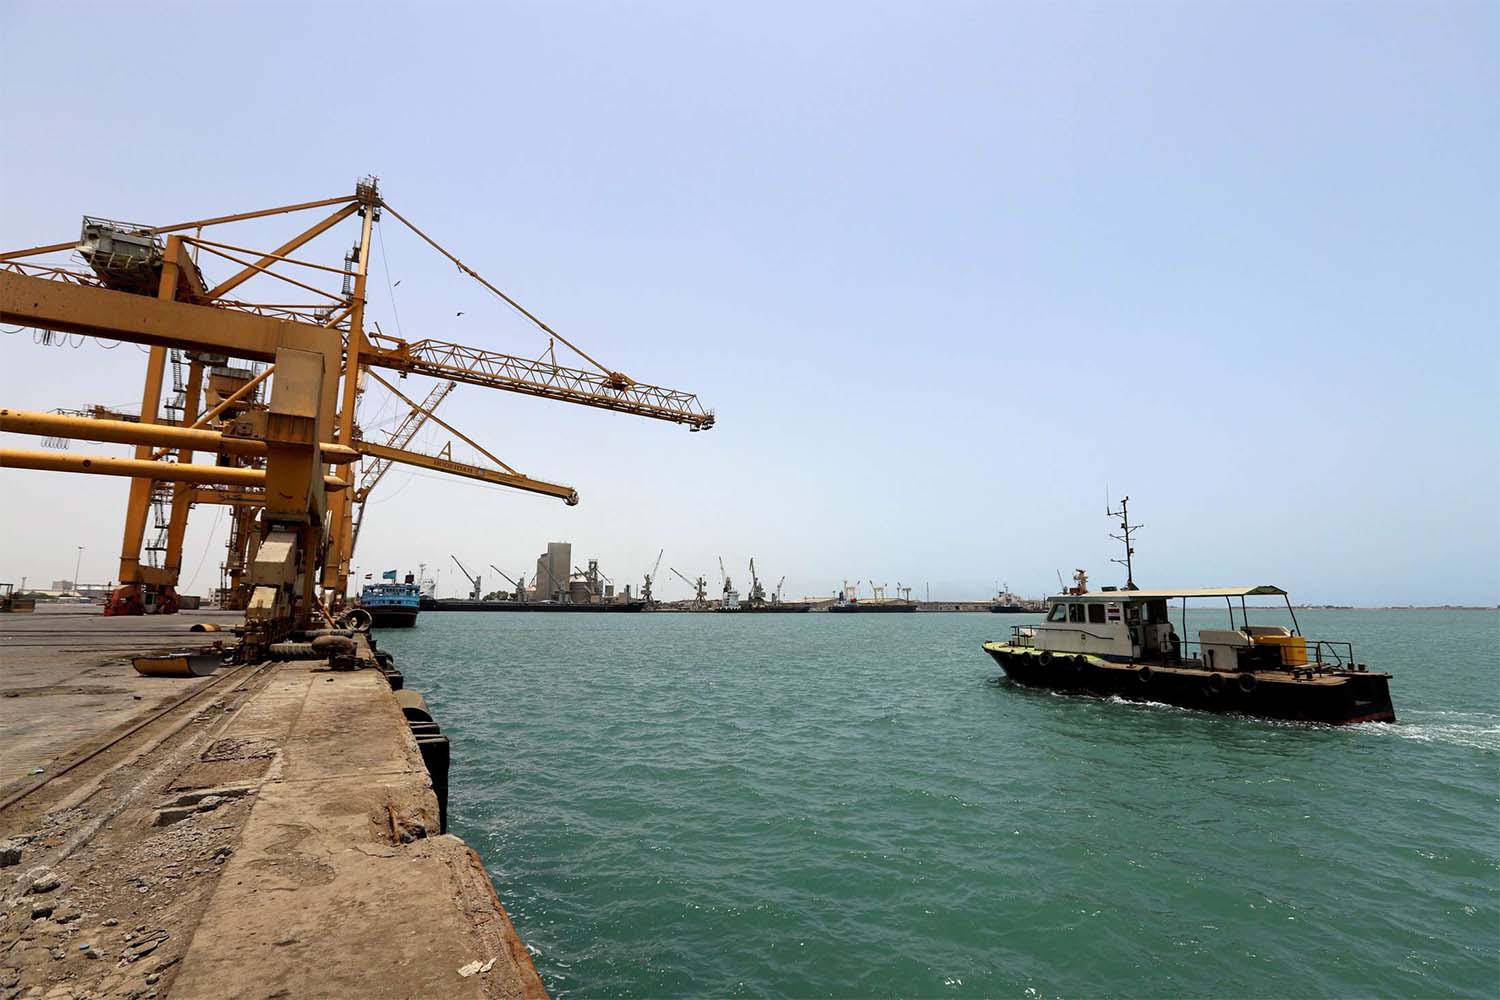 Huthi-held Hodeidah is the main entry point for Yemen's commercial imports and aid